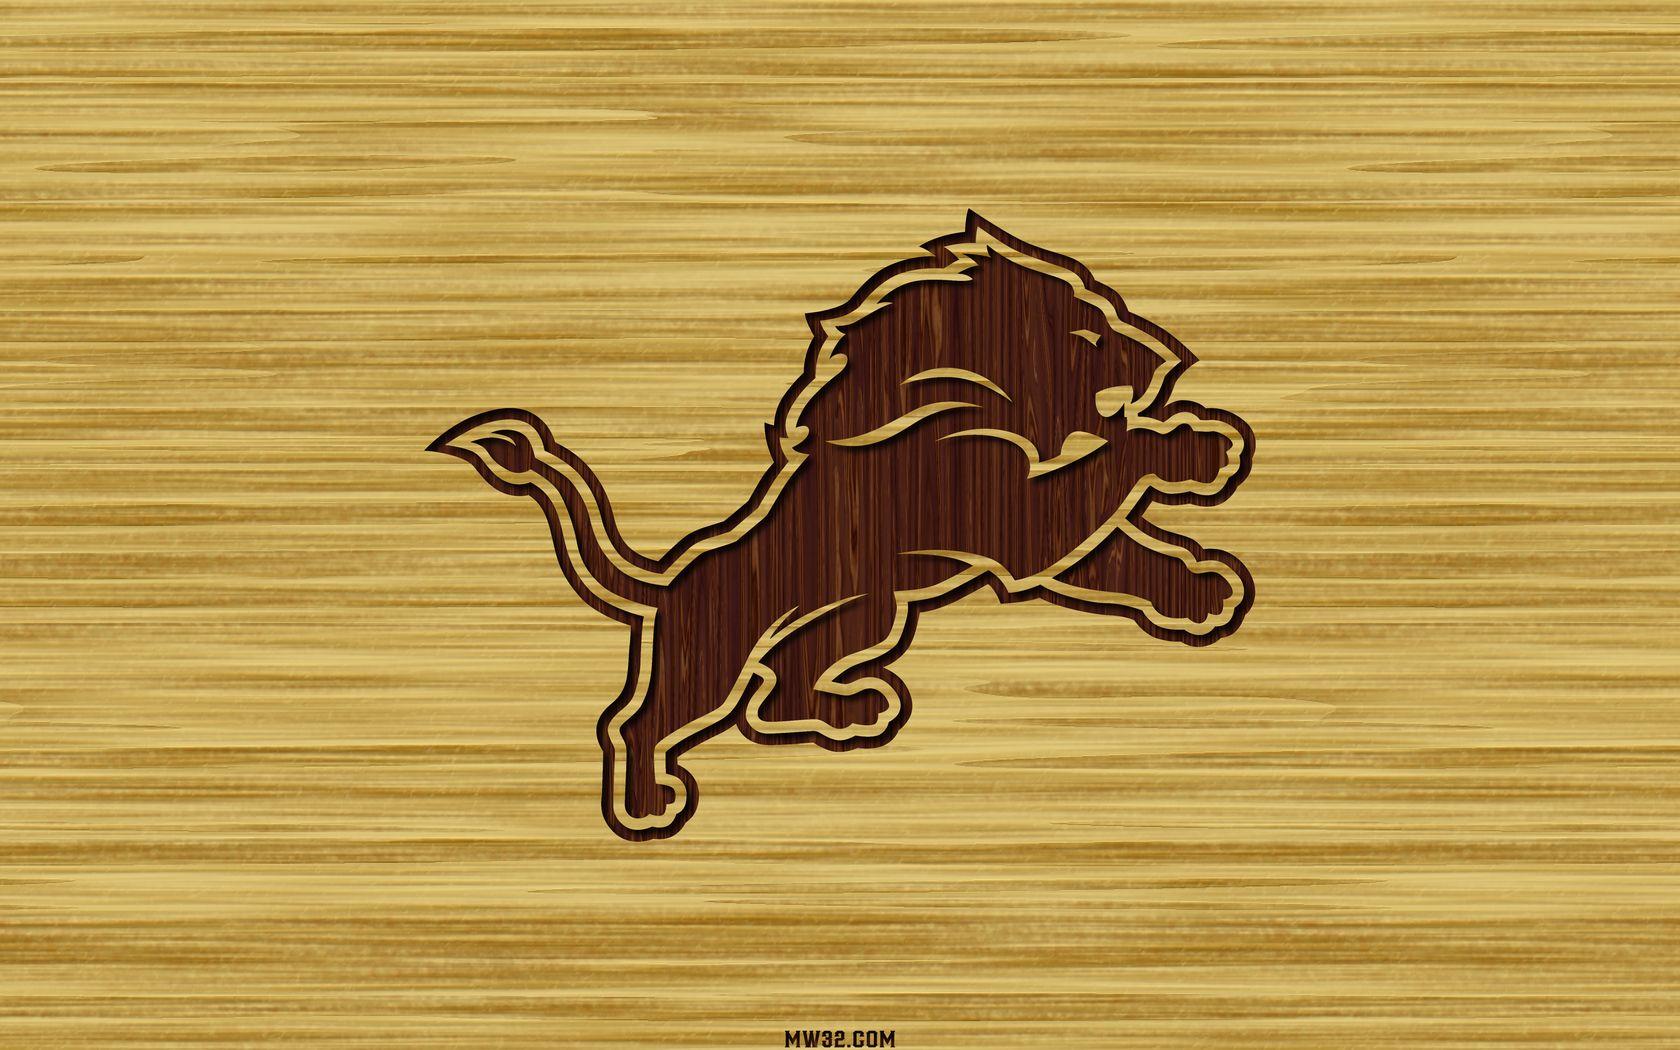 Download Detroit Lions Background, Wallpaper and Picture